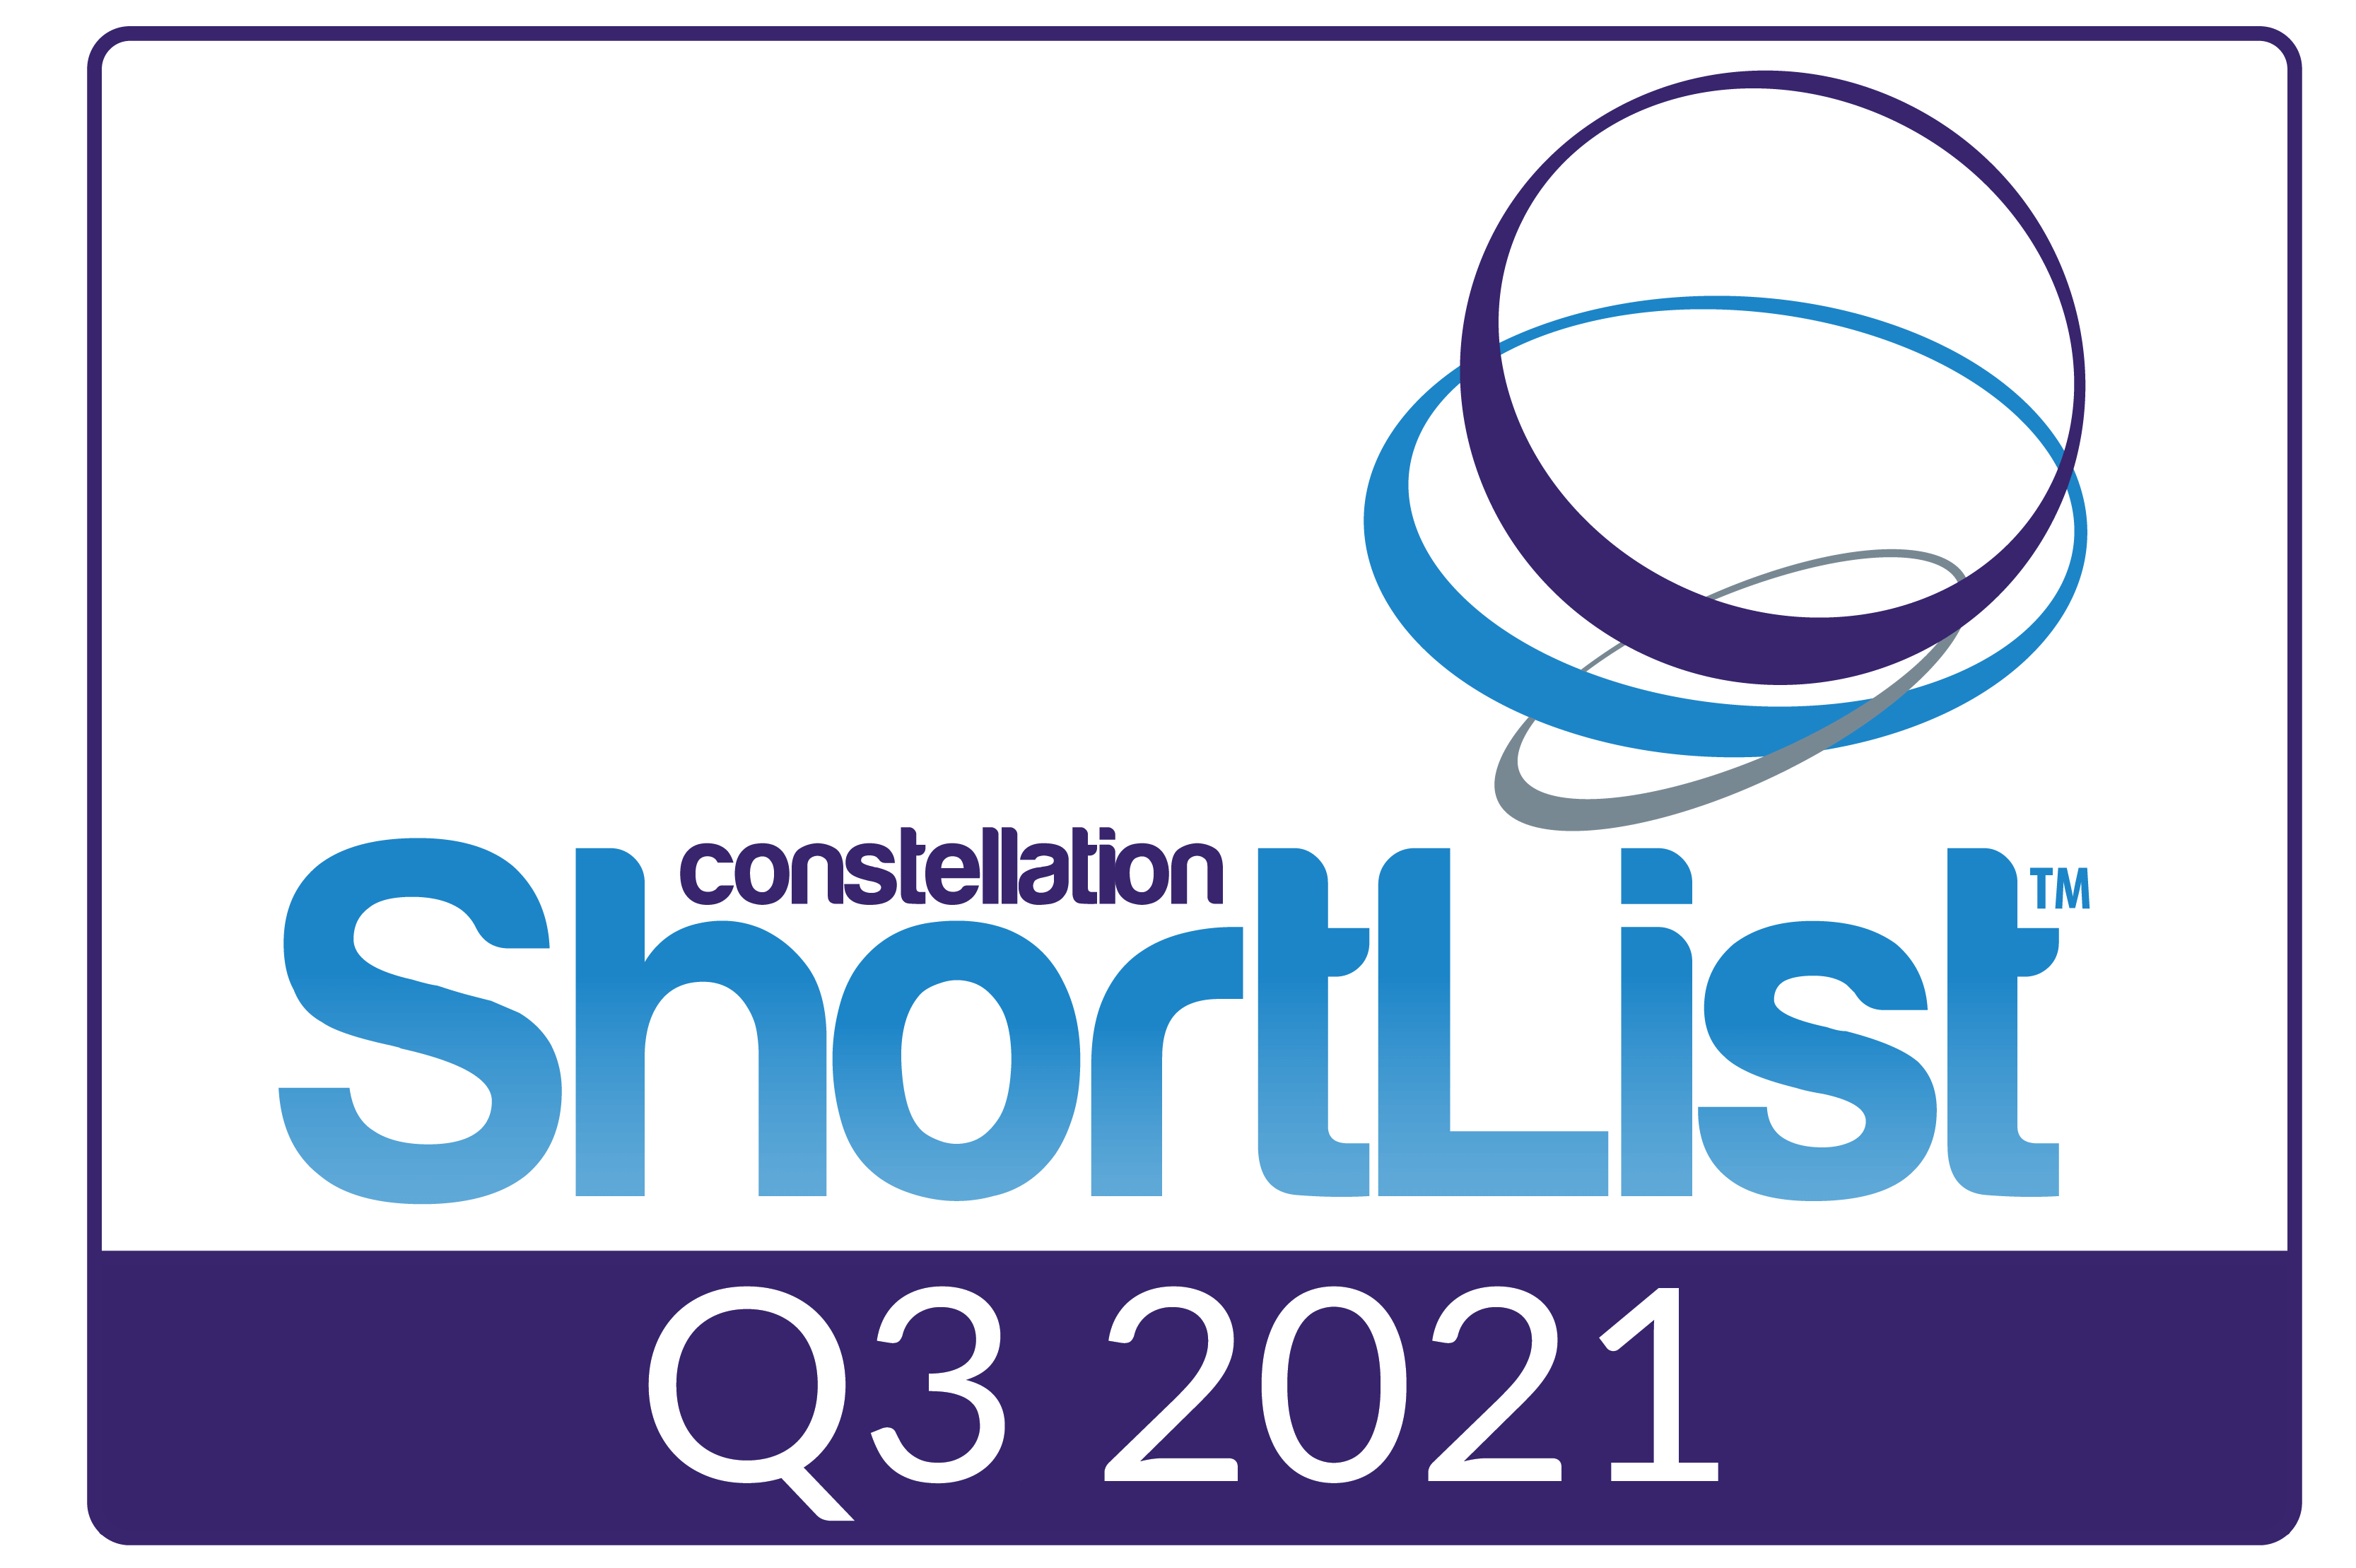  Constellation ShortList™ for Customer Experience (CX) Operations Services: Global logo